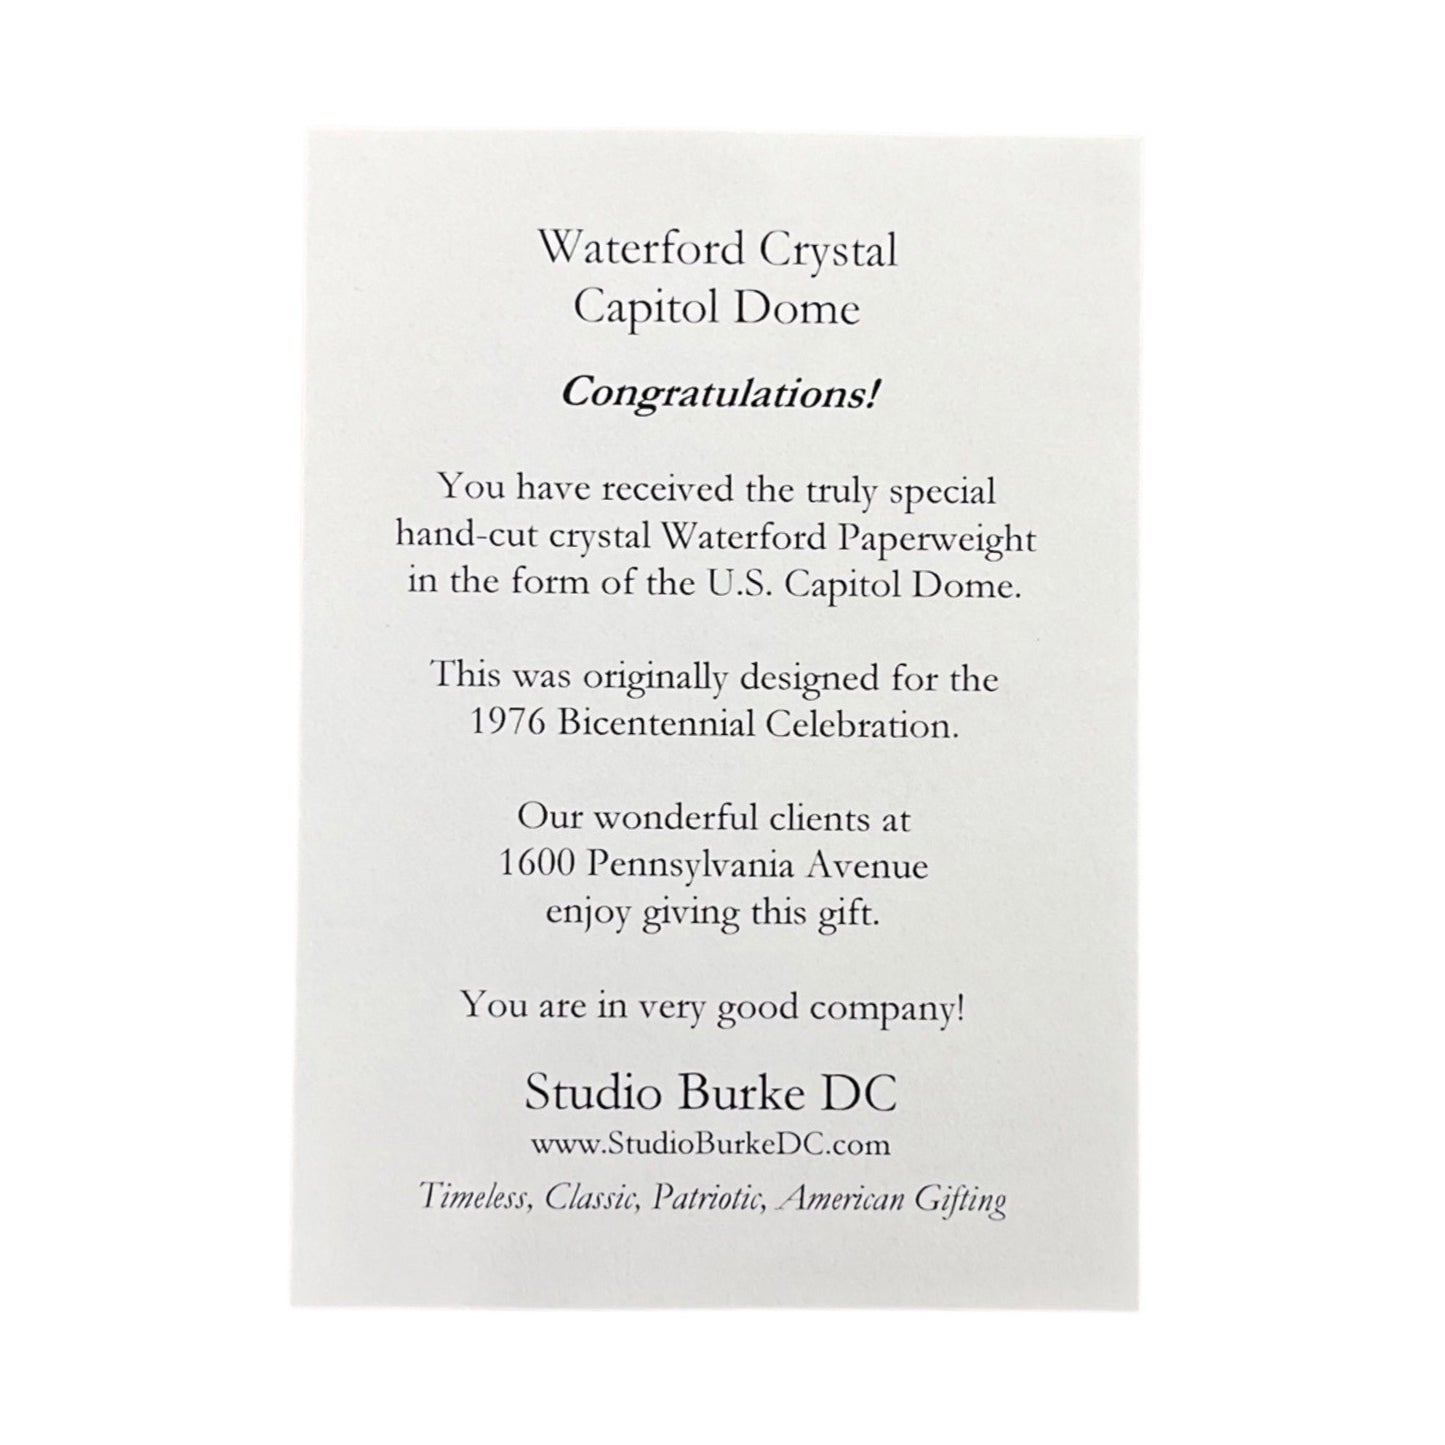 U.S. Department of Labor | Waterford Crystal Capitol Dome Award on Natural Walnut with Engraved Brass Plate & Special Archival Box